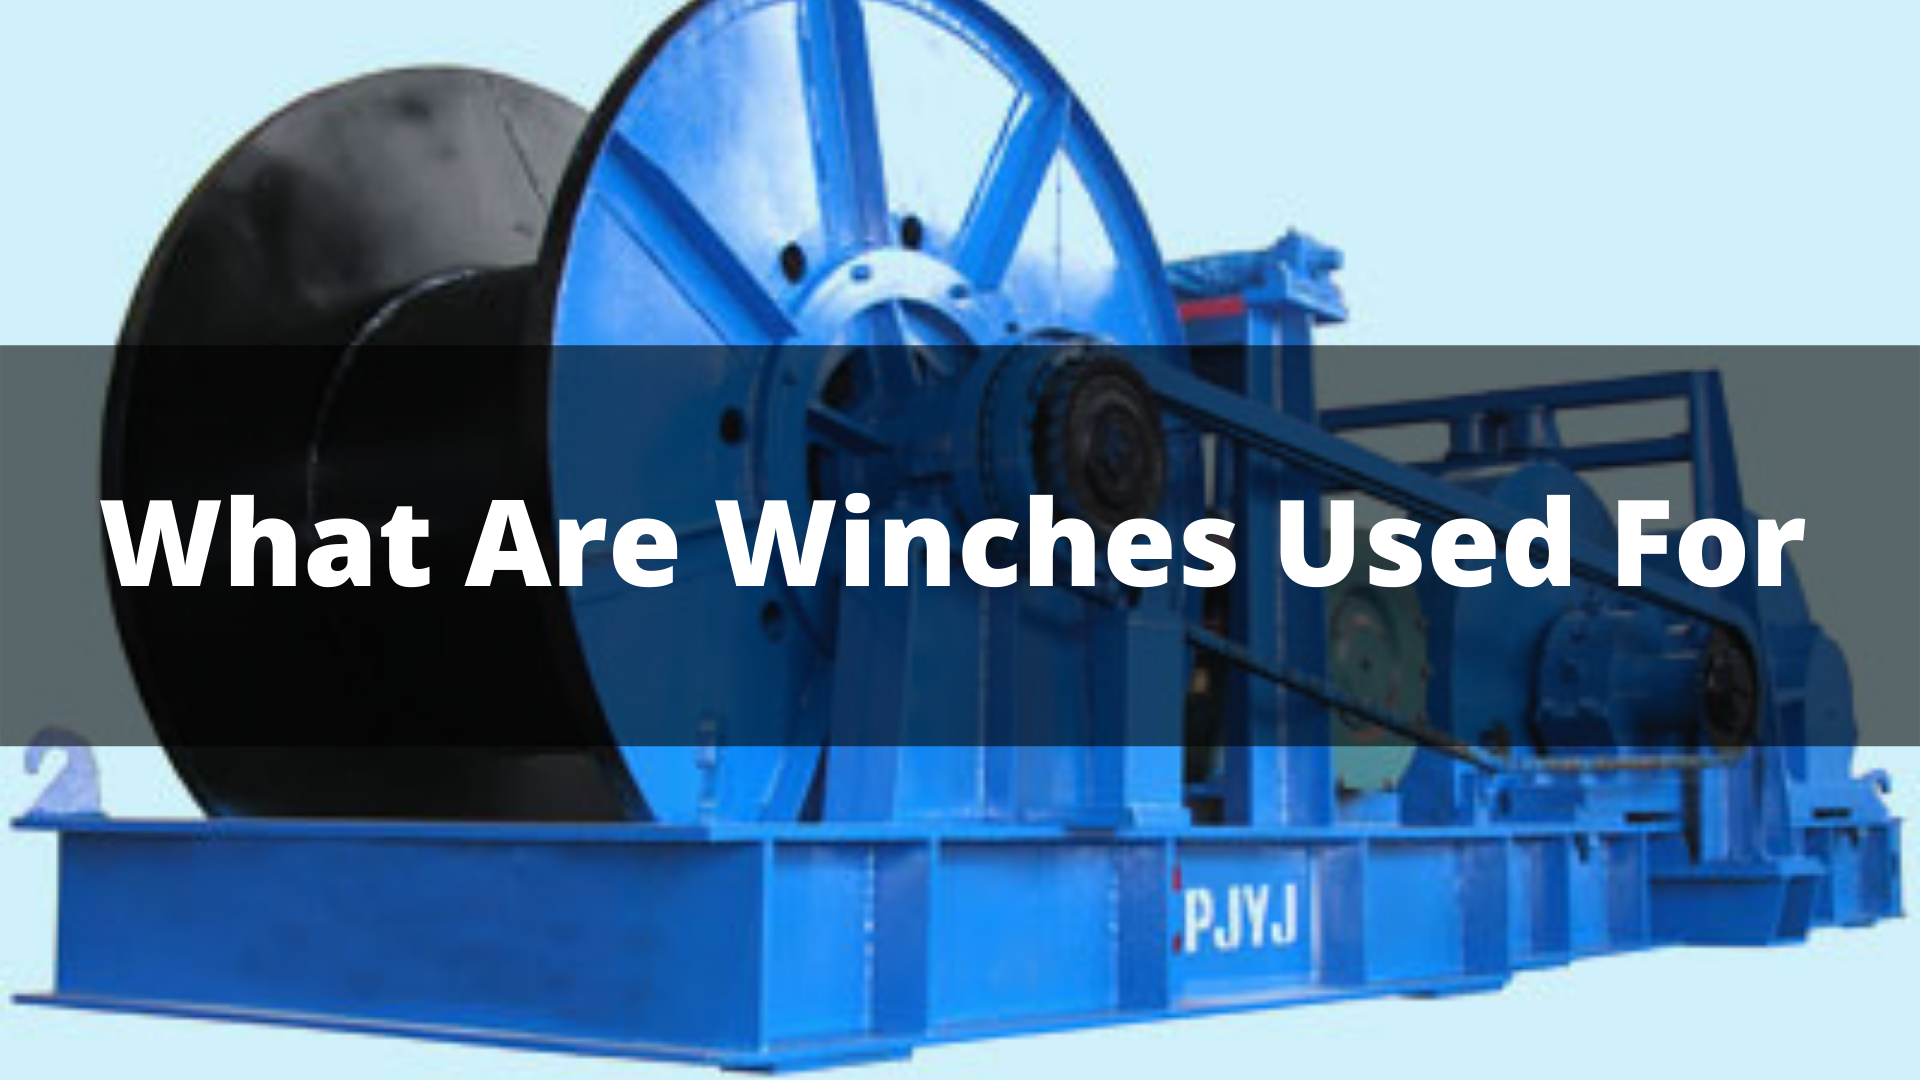 What Are Winches Used For